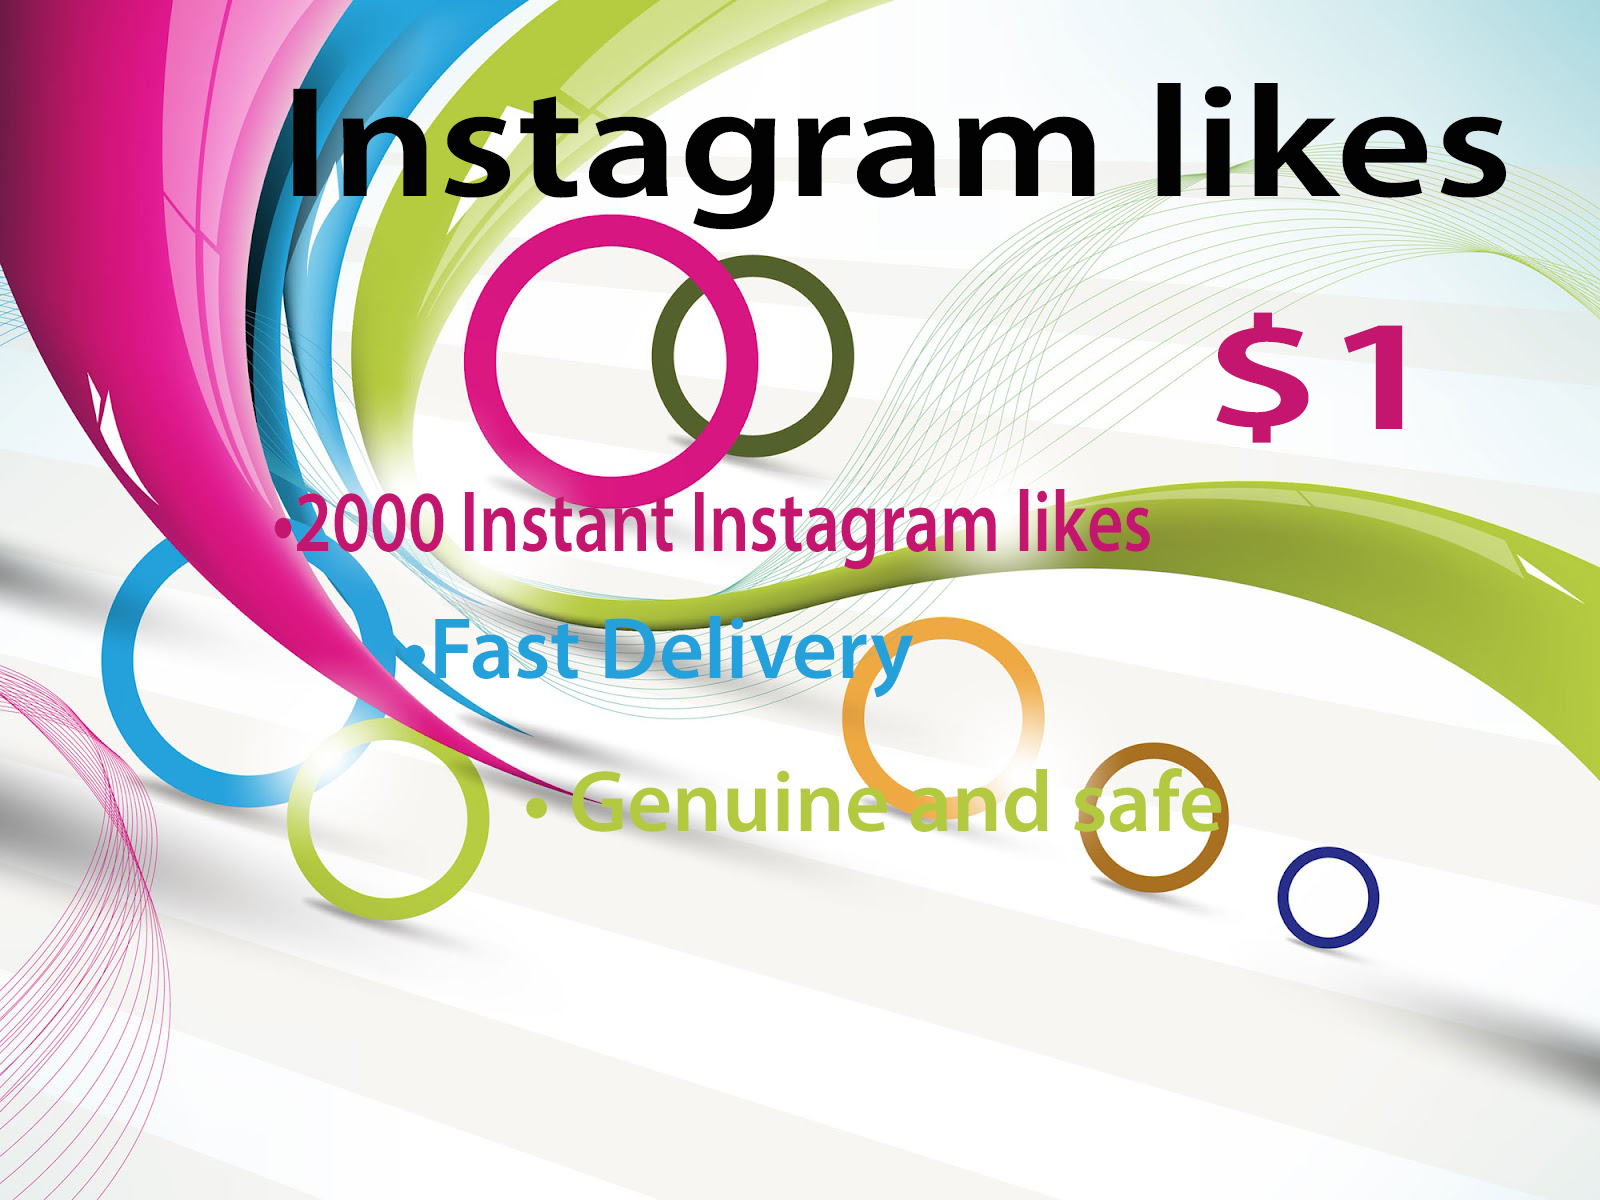 2000 Instagram likes Instant Delivery Real or 500 ... - 1600 x 1200 png 1098kB